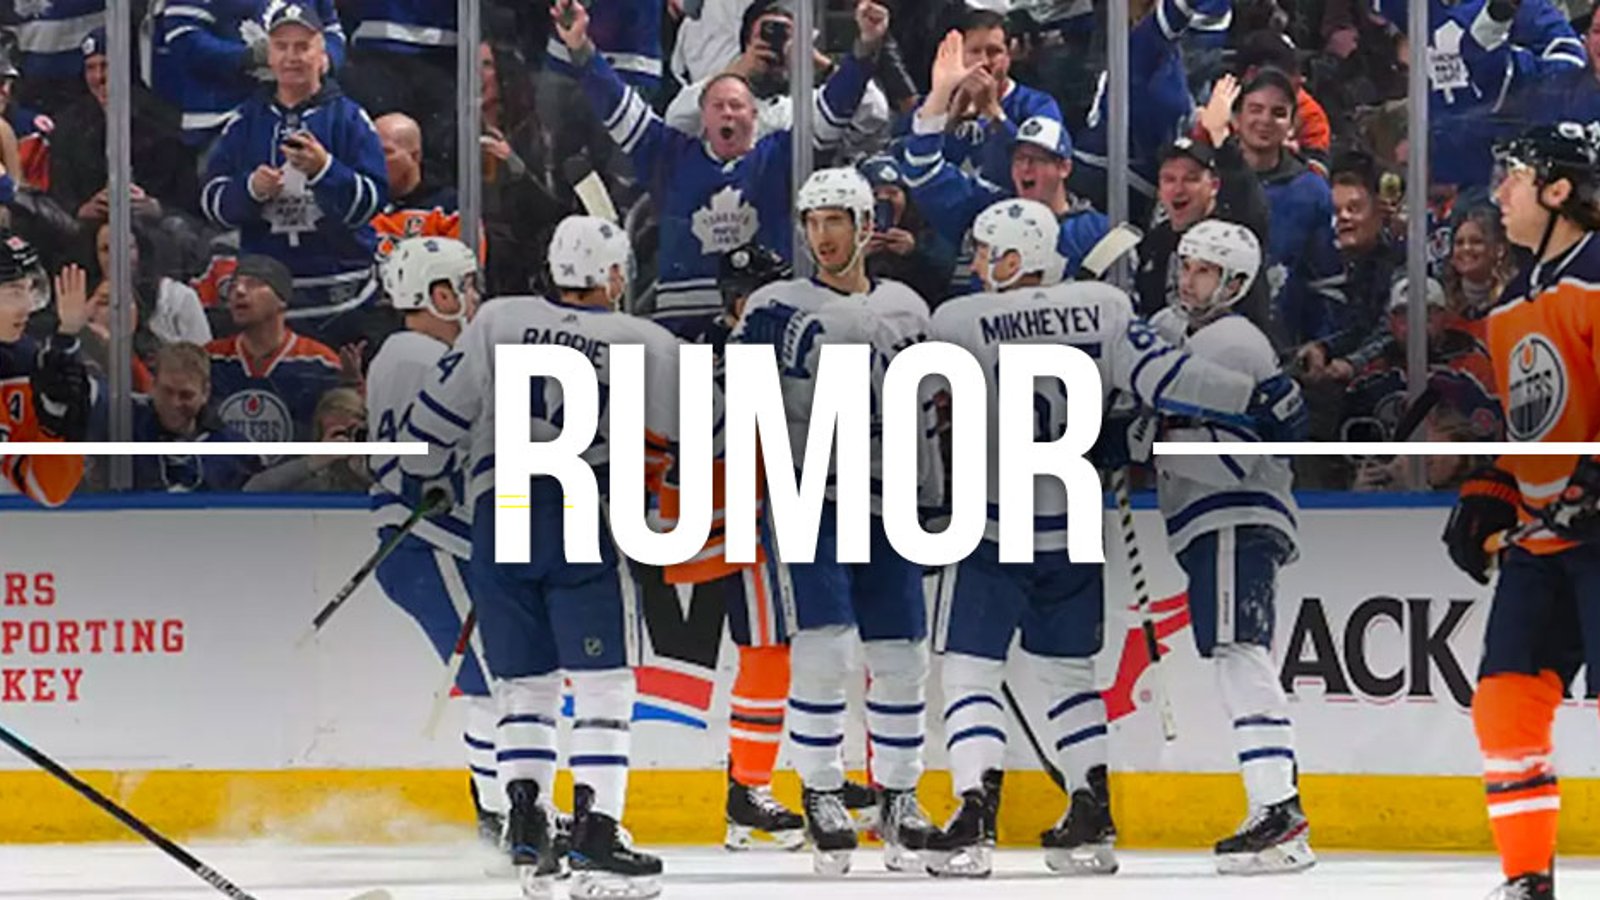 Major trade brewing between Leafs and Oilers?